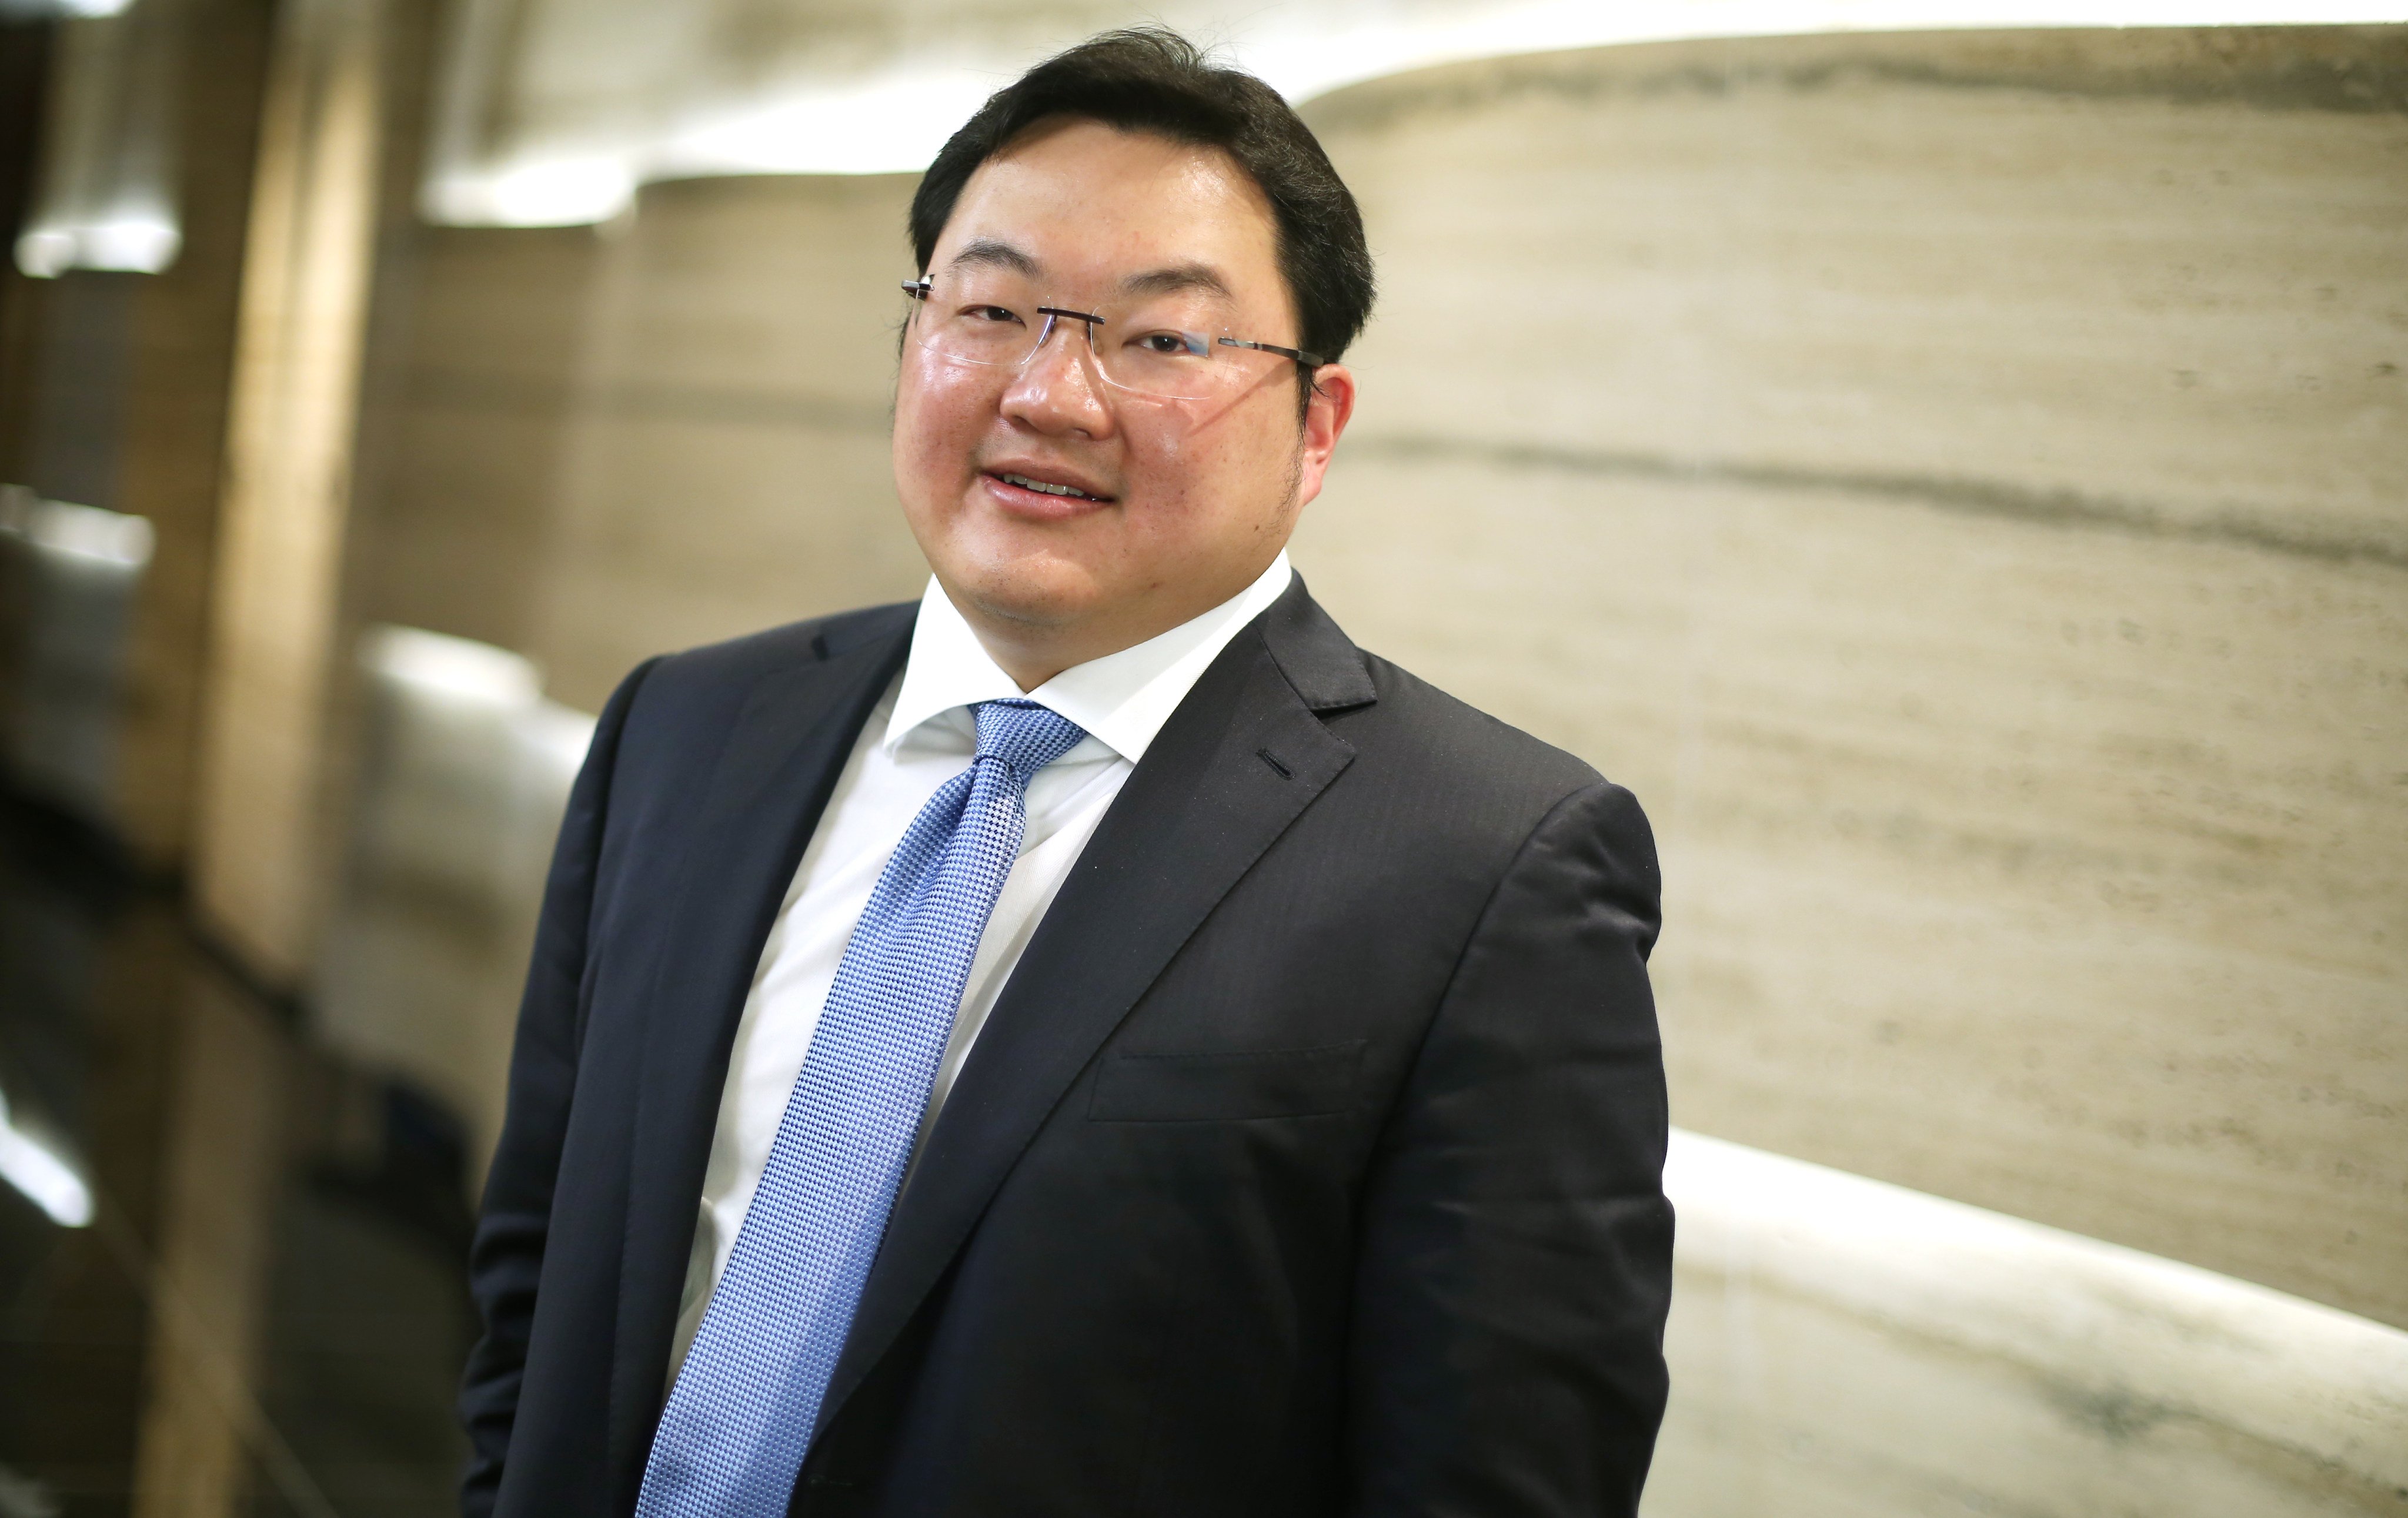 Fugitive financier Jho Low is wanted for his role in Malaysia’s multibillion-dollar 1MDB scandal. Photo: SCMP